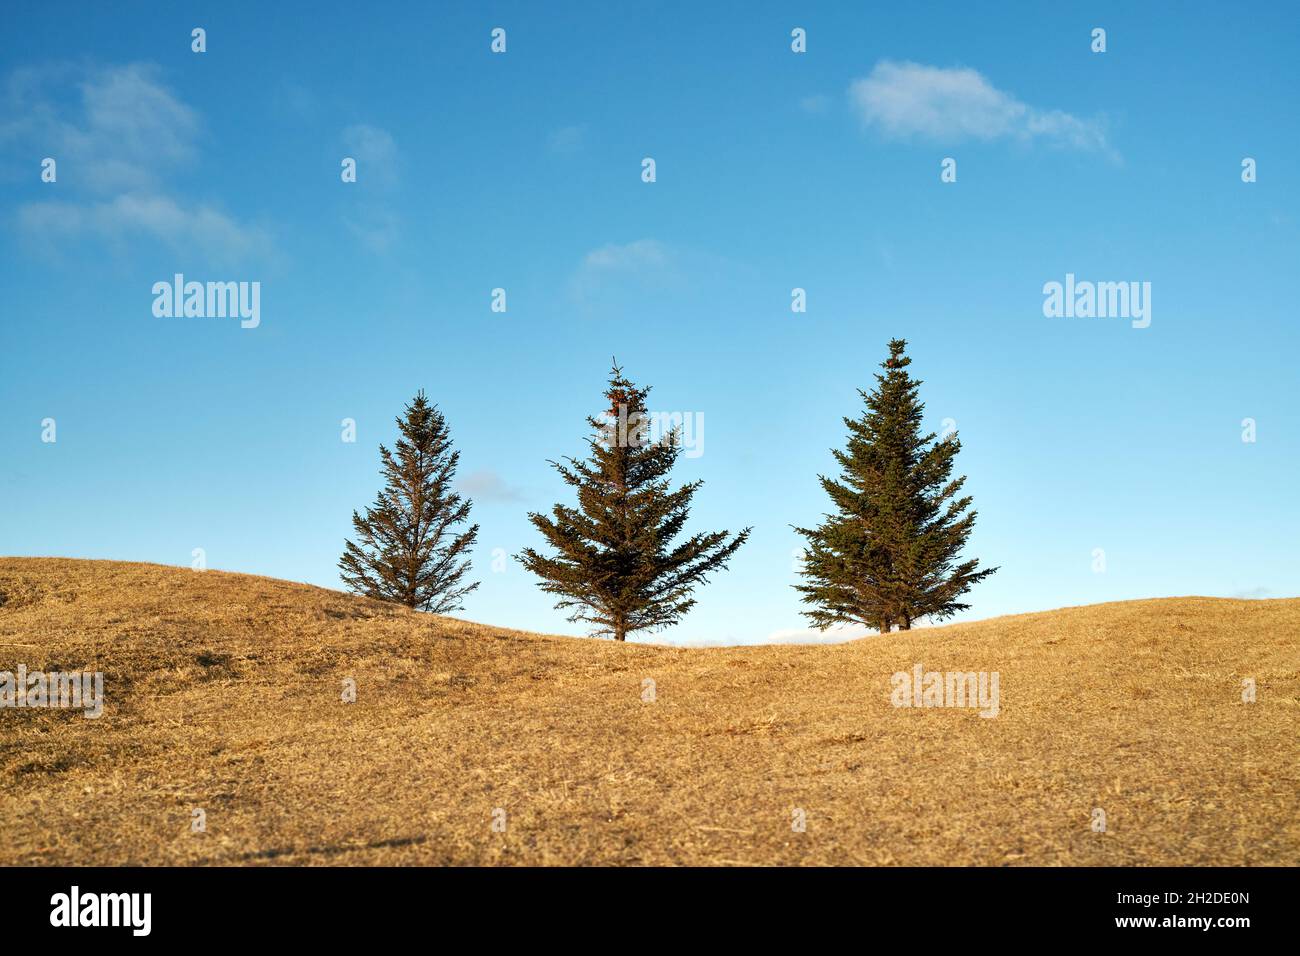 Picturesque scenery of spruces growing in row on dried hill on background of blue cloudless sky in fall in Iceland Stock Photo